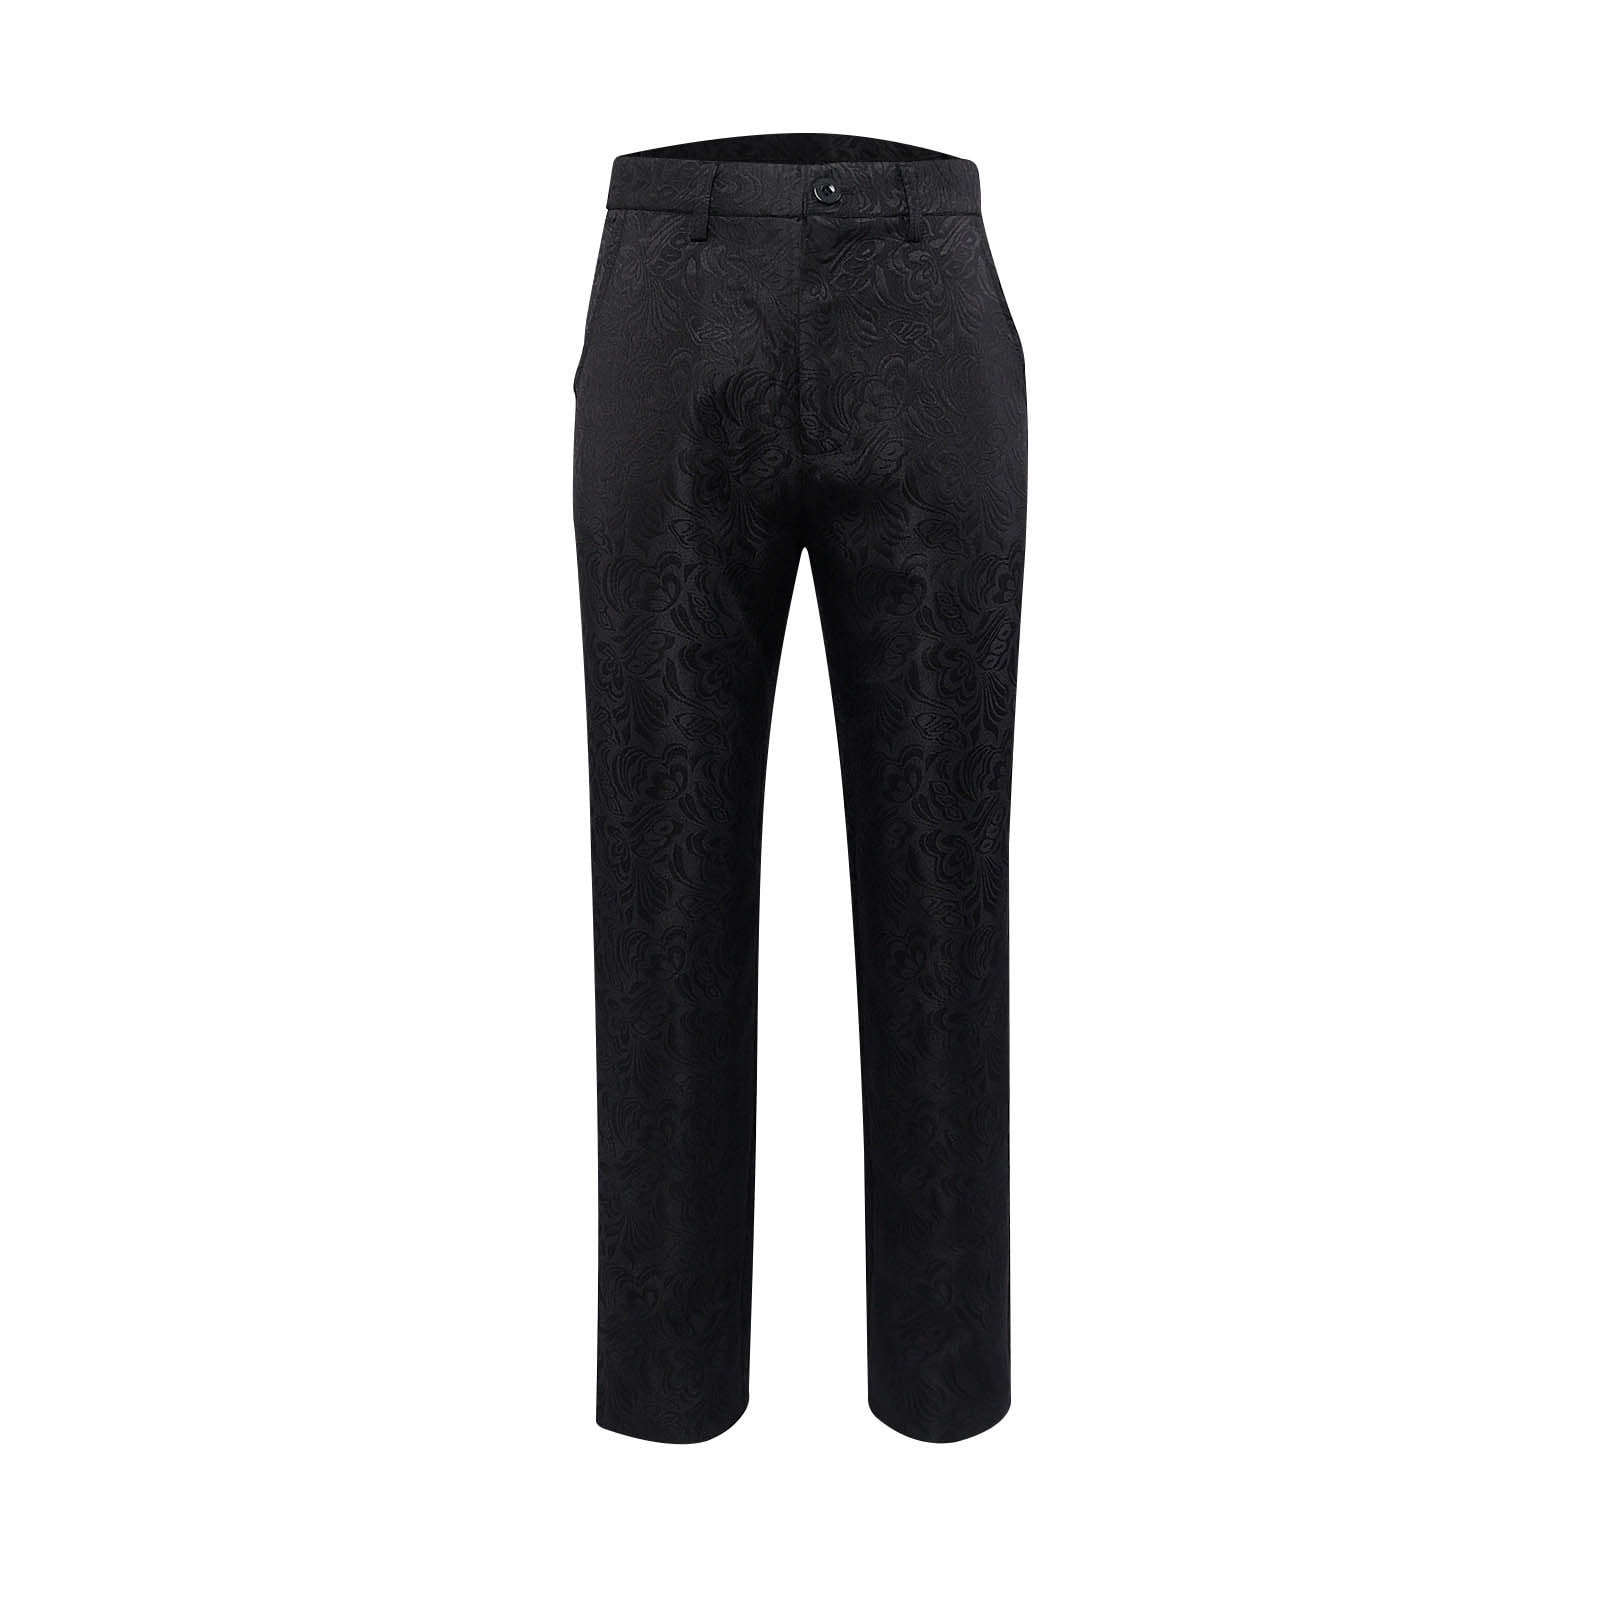 Penkiiy Dress Pants for Men Clearance Men's Gothic Style Pants